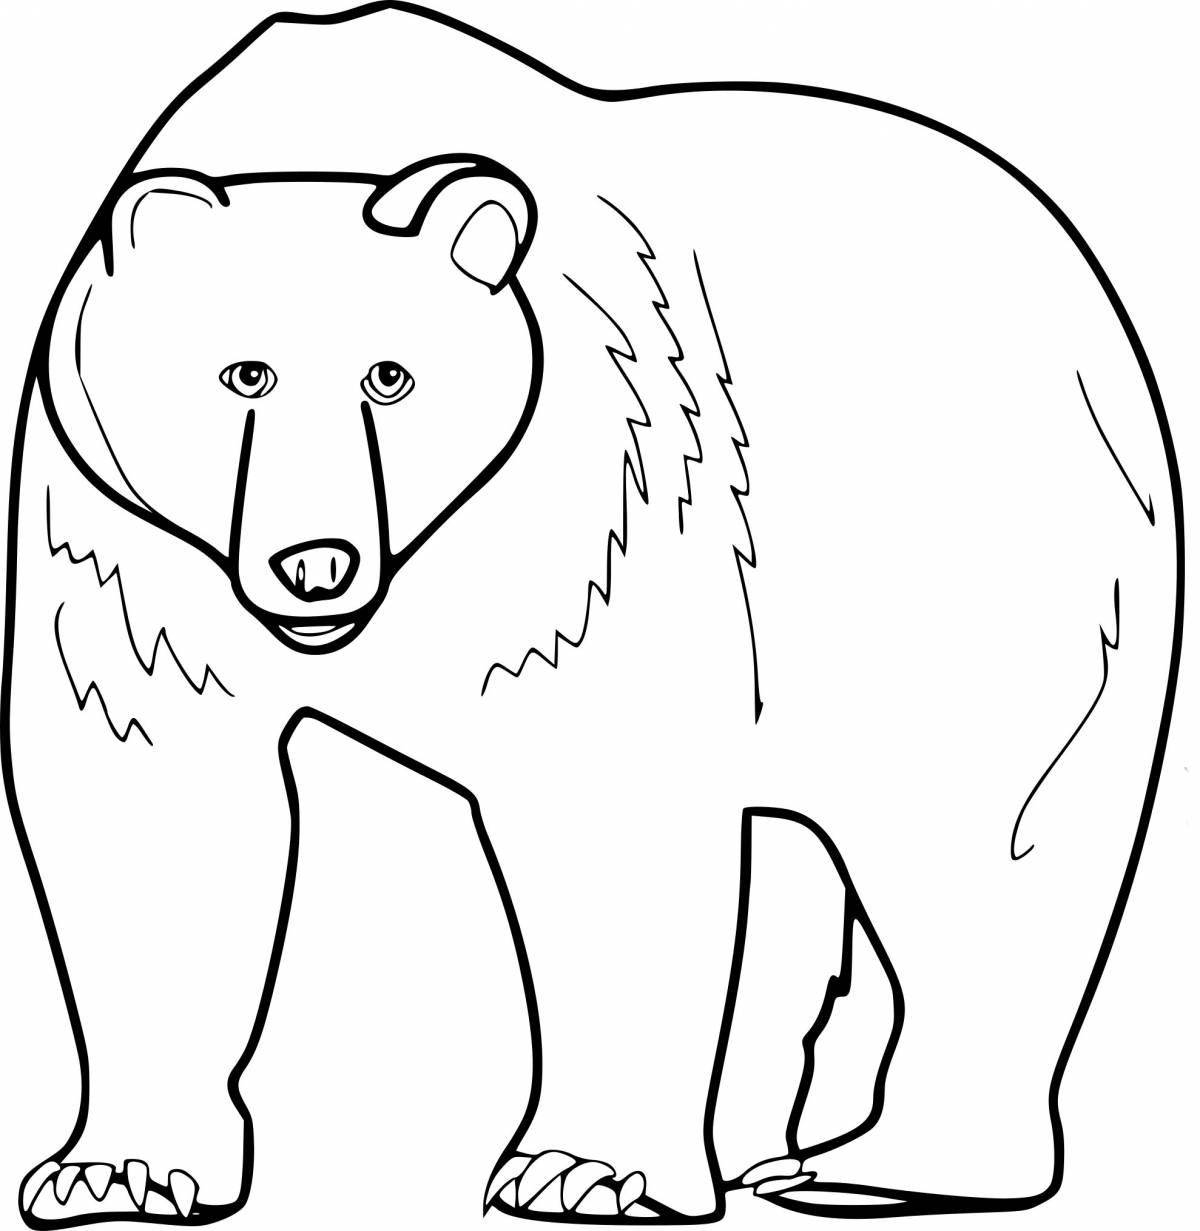 Huggable coloring page bear picture